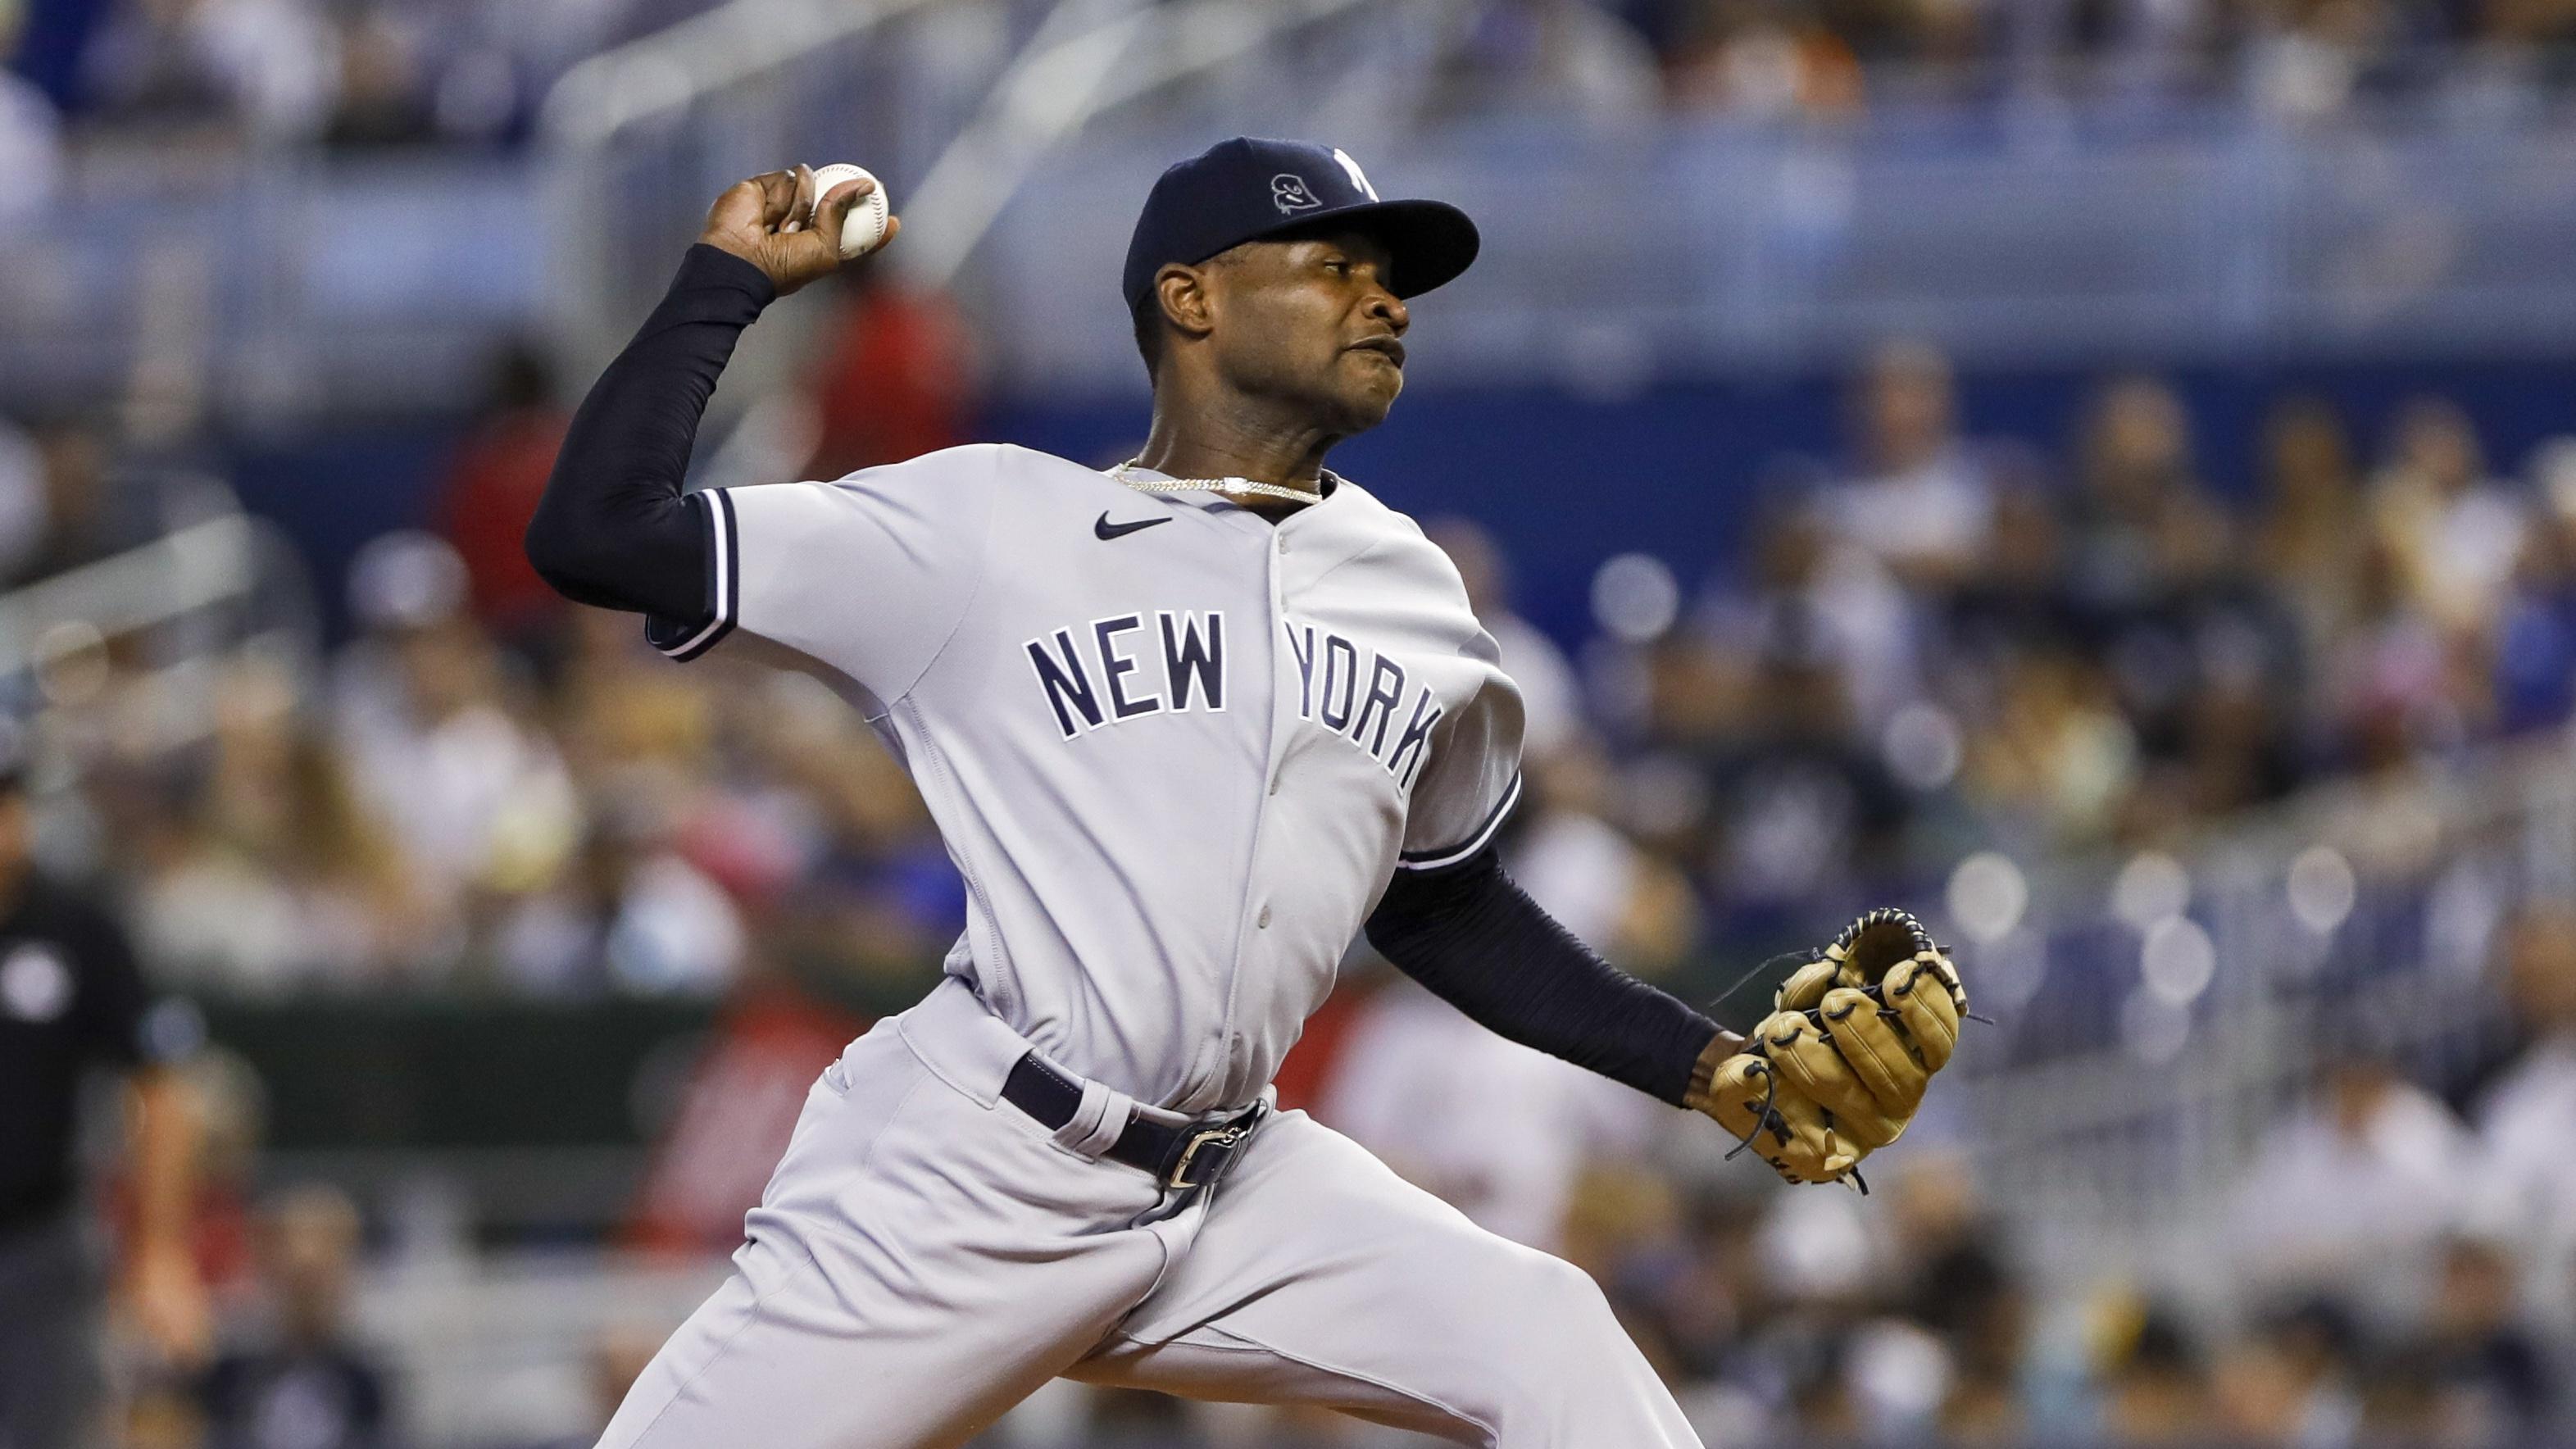 Jul 31, 2021; Miami, Florida, USA; New York Yankees starting pitcher Domingo German (55) delivers pitch during the first inning against the Miami Marlins at loanDepot Park. Mandatory Credit: Sam Navarro-USA TODAY Sports / © Sam Navarro-USA TODAY Sports